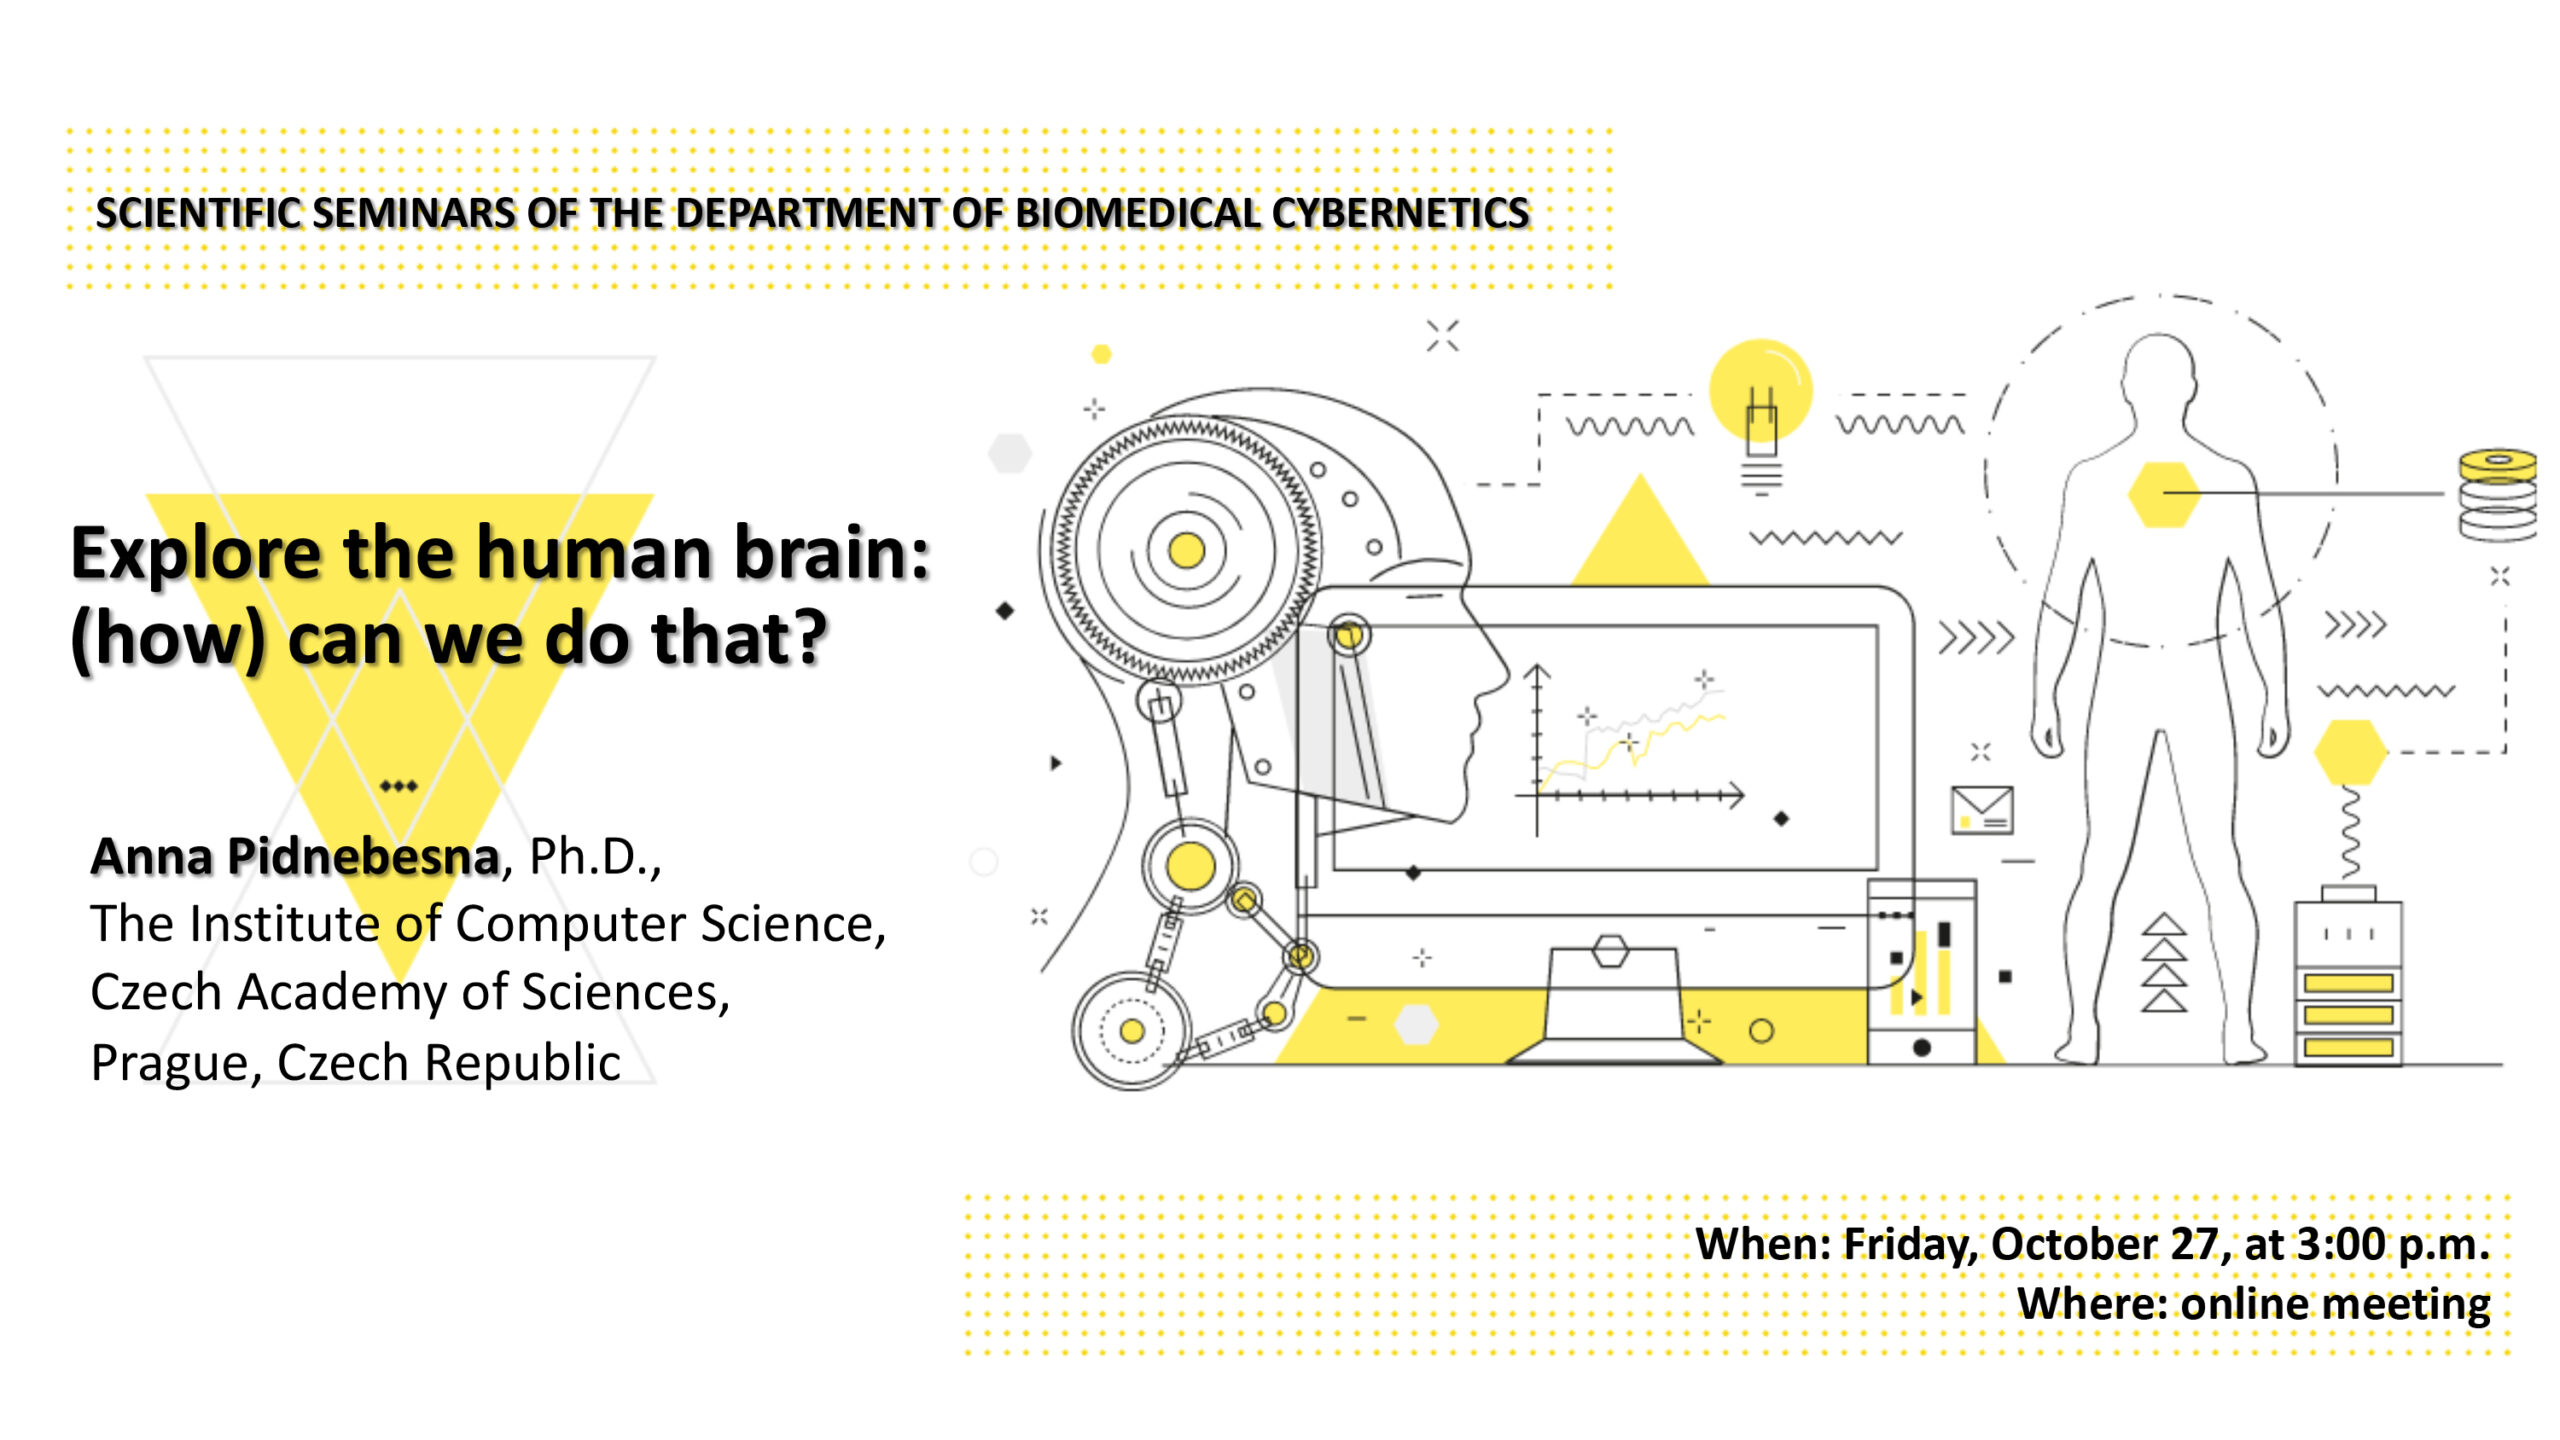 Explore the human brain: (how) can we do that?